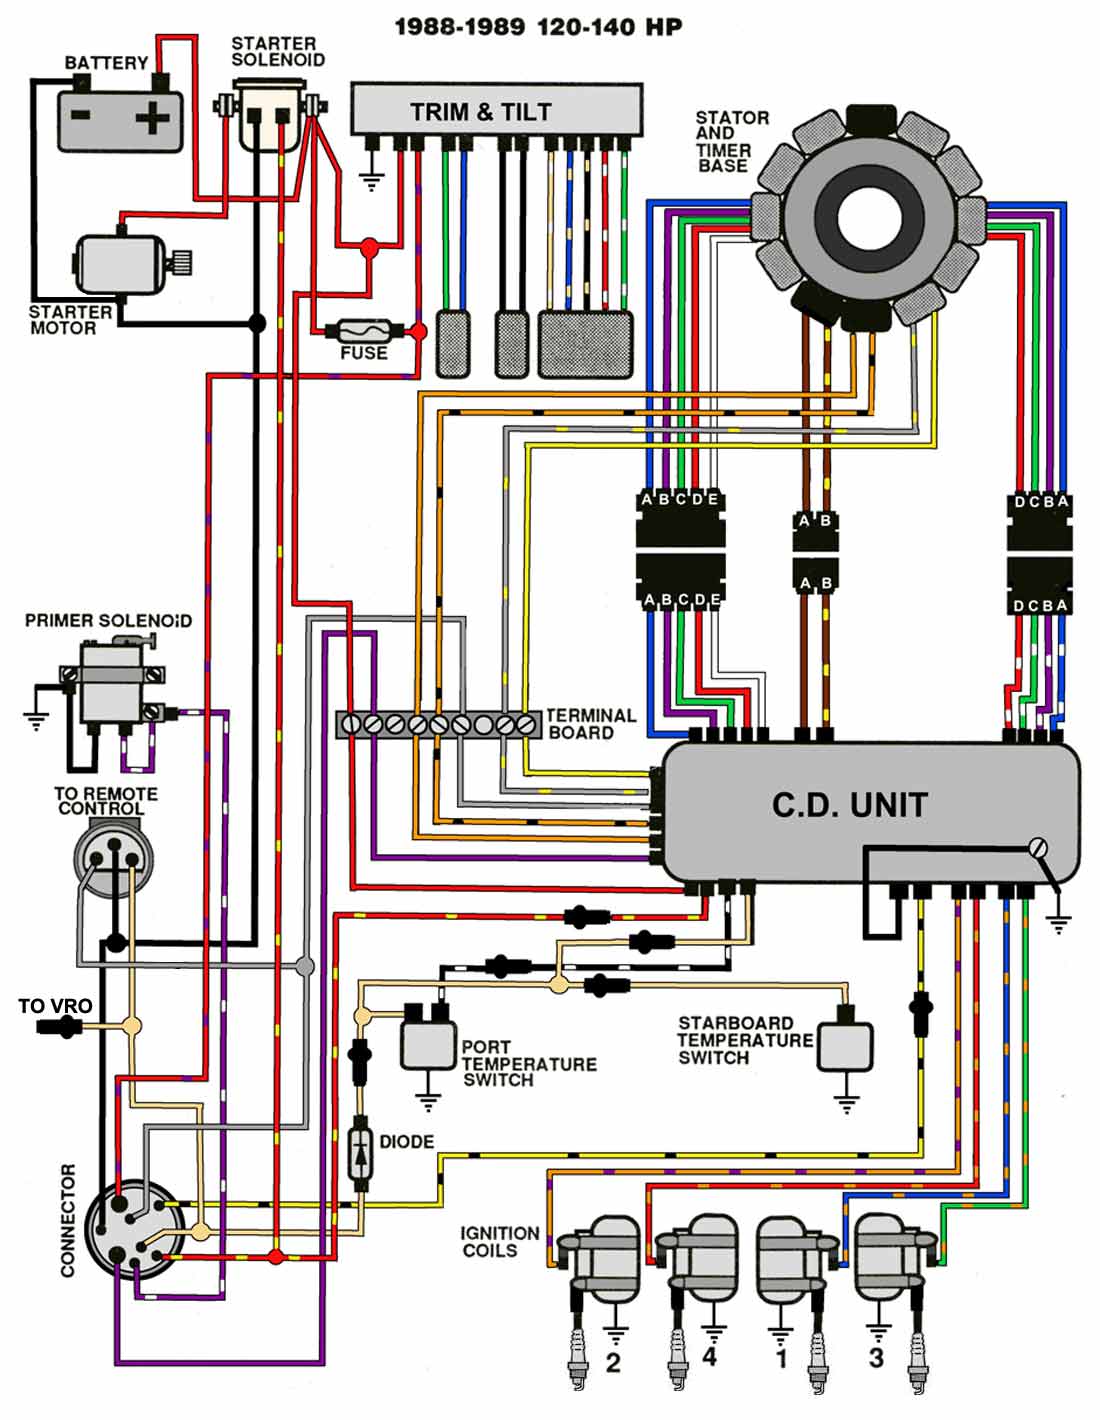 I Need A Wiring Diagram For A 1993 Johnson 115  The Engine